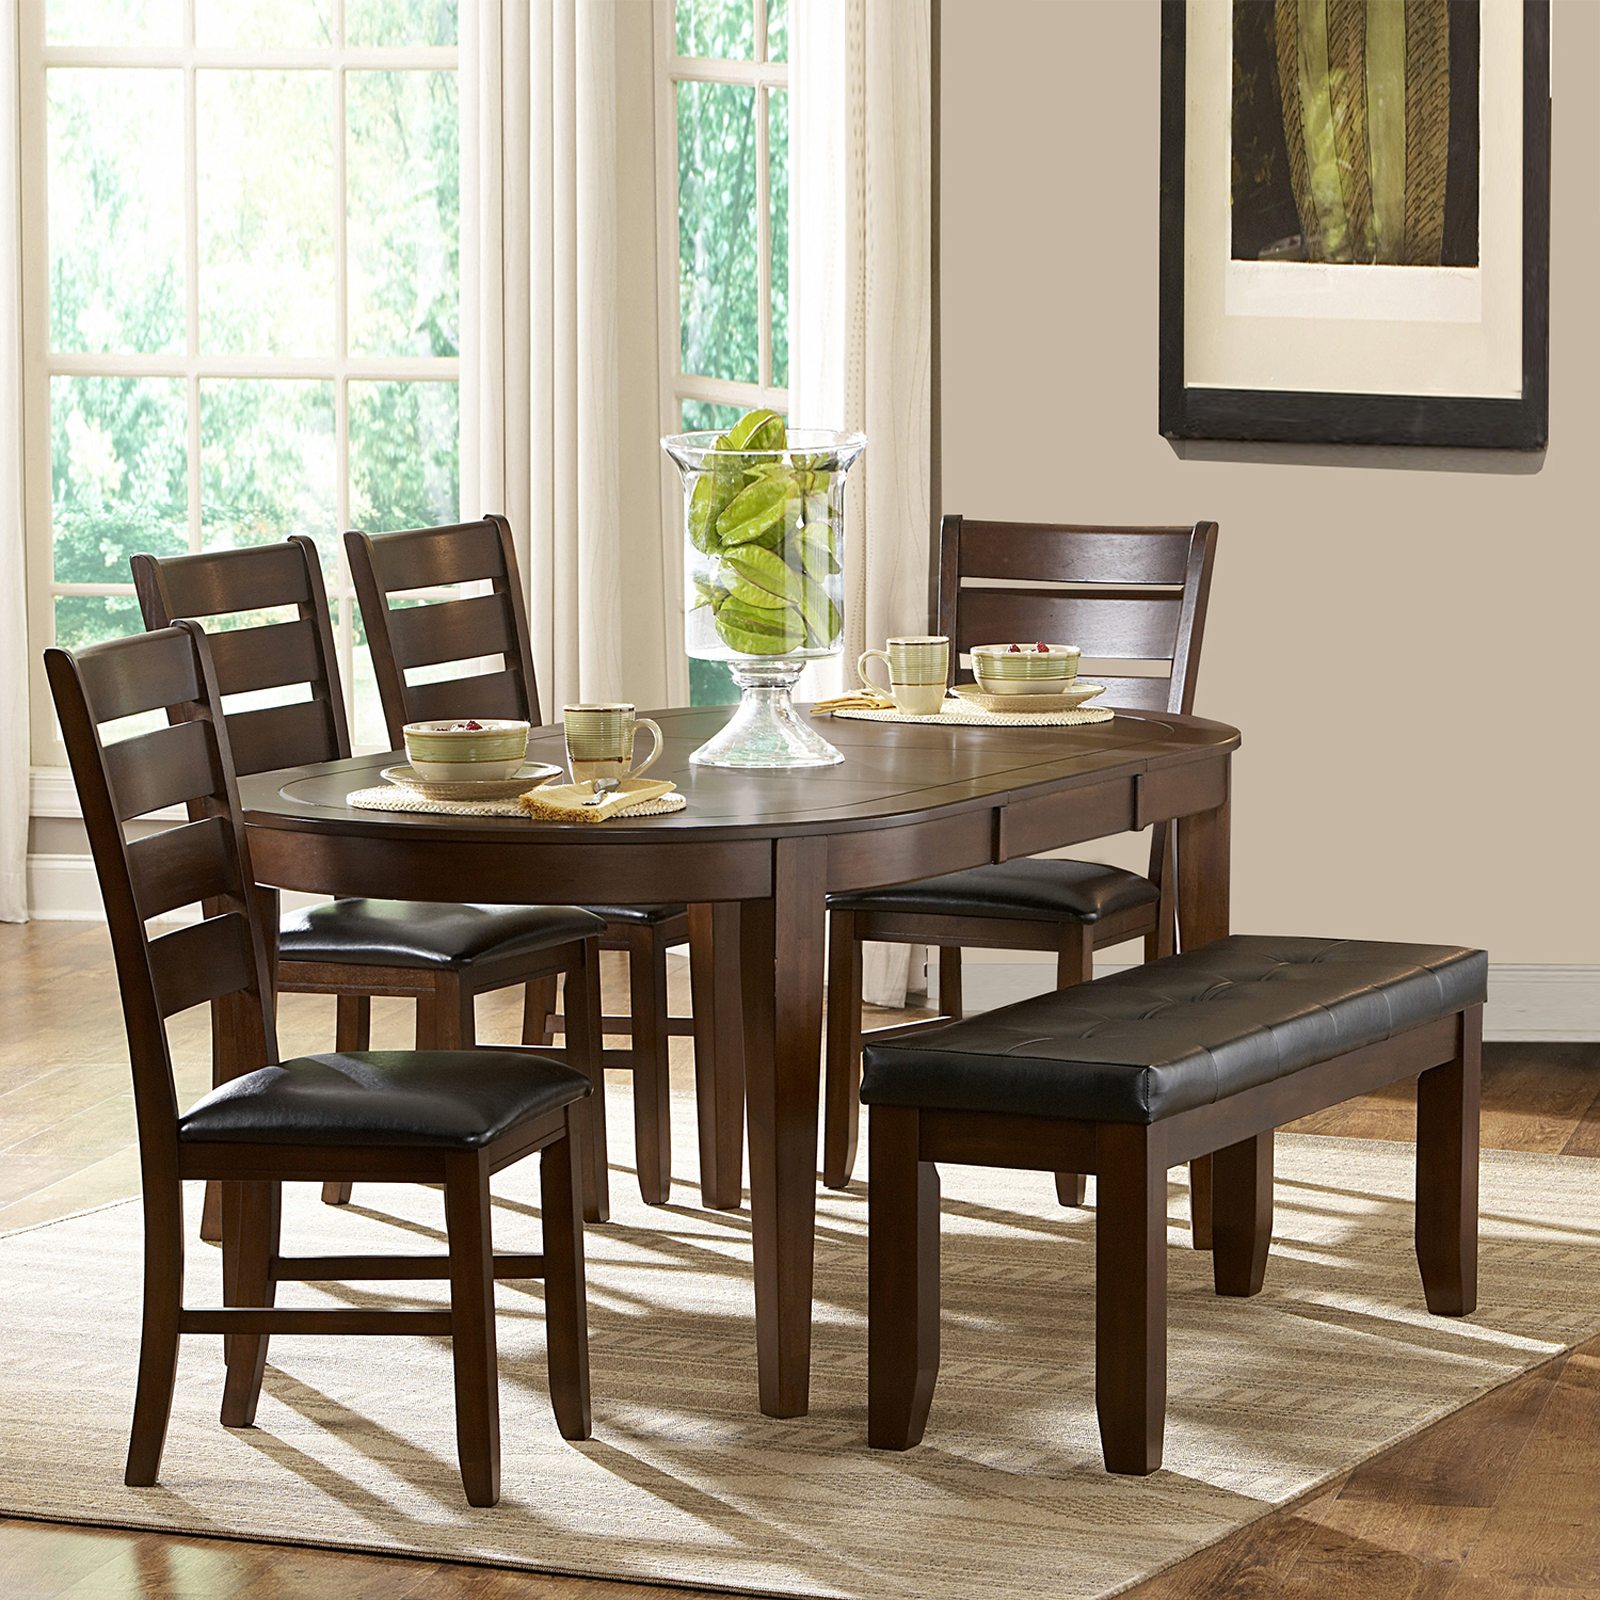 Round dining room sets with leaf 13